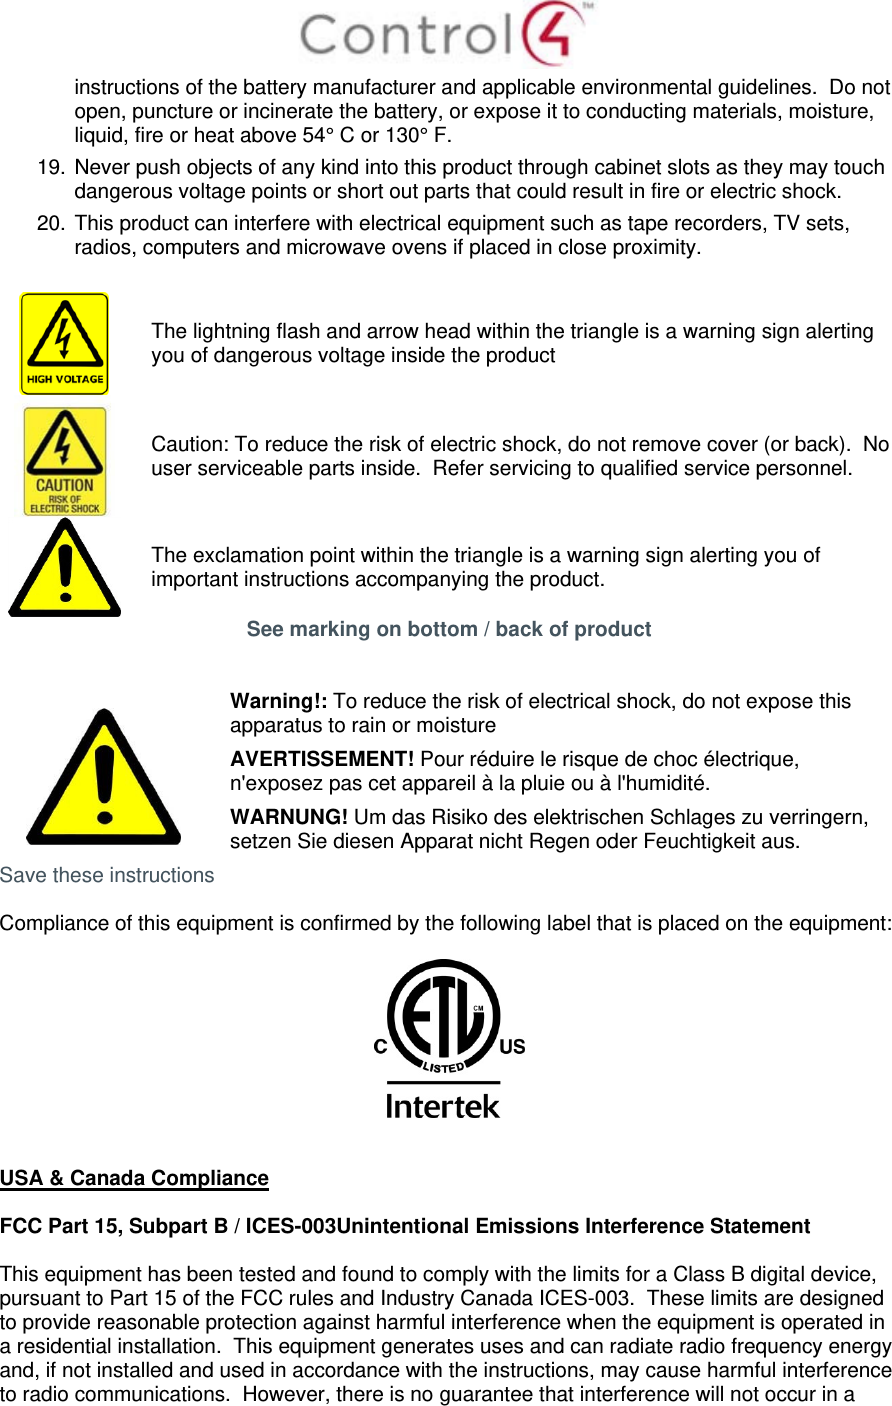  instructions of the battery manufacturer and applicable environmental guidelines.  Do not open, puncture or incinerate the battery, or expose it to conducting materials, moisture, liquid, fire or heat above 54° C or 130° F.  19. Never push objects of any kind into this product through cabinet slots as they may touch dangerous voltage points or short out parts that could result in fire or electric shock. 20. This product can interfere with electrical equipment such as tape recorders, TV sets, radios, computers and microwave ovens if placed in close proximity.   The lightning flash and arrow head within the triangle is a warning sign alerting you of dangerous voltage inside the product  Caution: To reduce the risk of electric shock, do not remove cover (or back).  No user serviceable parts inside.  Refer servicing to qualified service personnel.  The exclamation point within the triangle is a warning sign alerting you of important instructions accompanying the product. See marking on bottom / back of product    Warning!: To reduce the risk of electrical shock, do not expose this apparatus to rain or moisture AVERTISSEMENT! Pour réduire le risque de choc électrique, n&apos;exposez pas cet appareil à la pluie ou à l&apos;humidité. WARNUNG! Um das Risiko des elektrischen Schlages zu verringern, setzen Sie diesen Apparat nicht Regen oder Feuchtigkeit aus. Save these instructions  Compliance of this equipment is confirmed by the following label that is placed on the equipment:     USA &amp; Canada Compliance  FCC Part 15, Subpart B / ICES-003Unintentional Emissions Interference Statement  This equipment has been tested and found to comply with the limits for a Class B digital device, pursuant to Part 15 of the FCC rules and Industry Canada ICES-003.  These limits are designed to provide reasonable protection against harmful interference when the equipment is operated in a residential installation.  This equipment generates uses and can radiate radio frequency energy and, if not installed and used in accordance with the instructions, may cause harmful interference to radio communications.  However, there is no guarantee that interference will not occur in a 